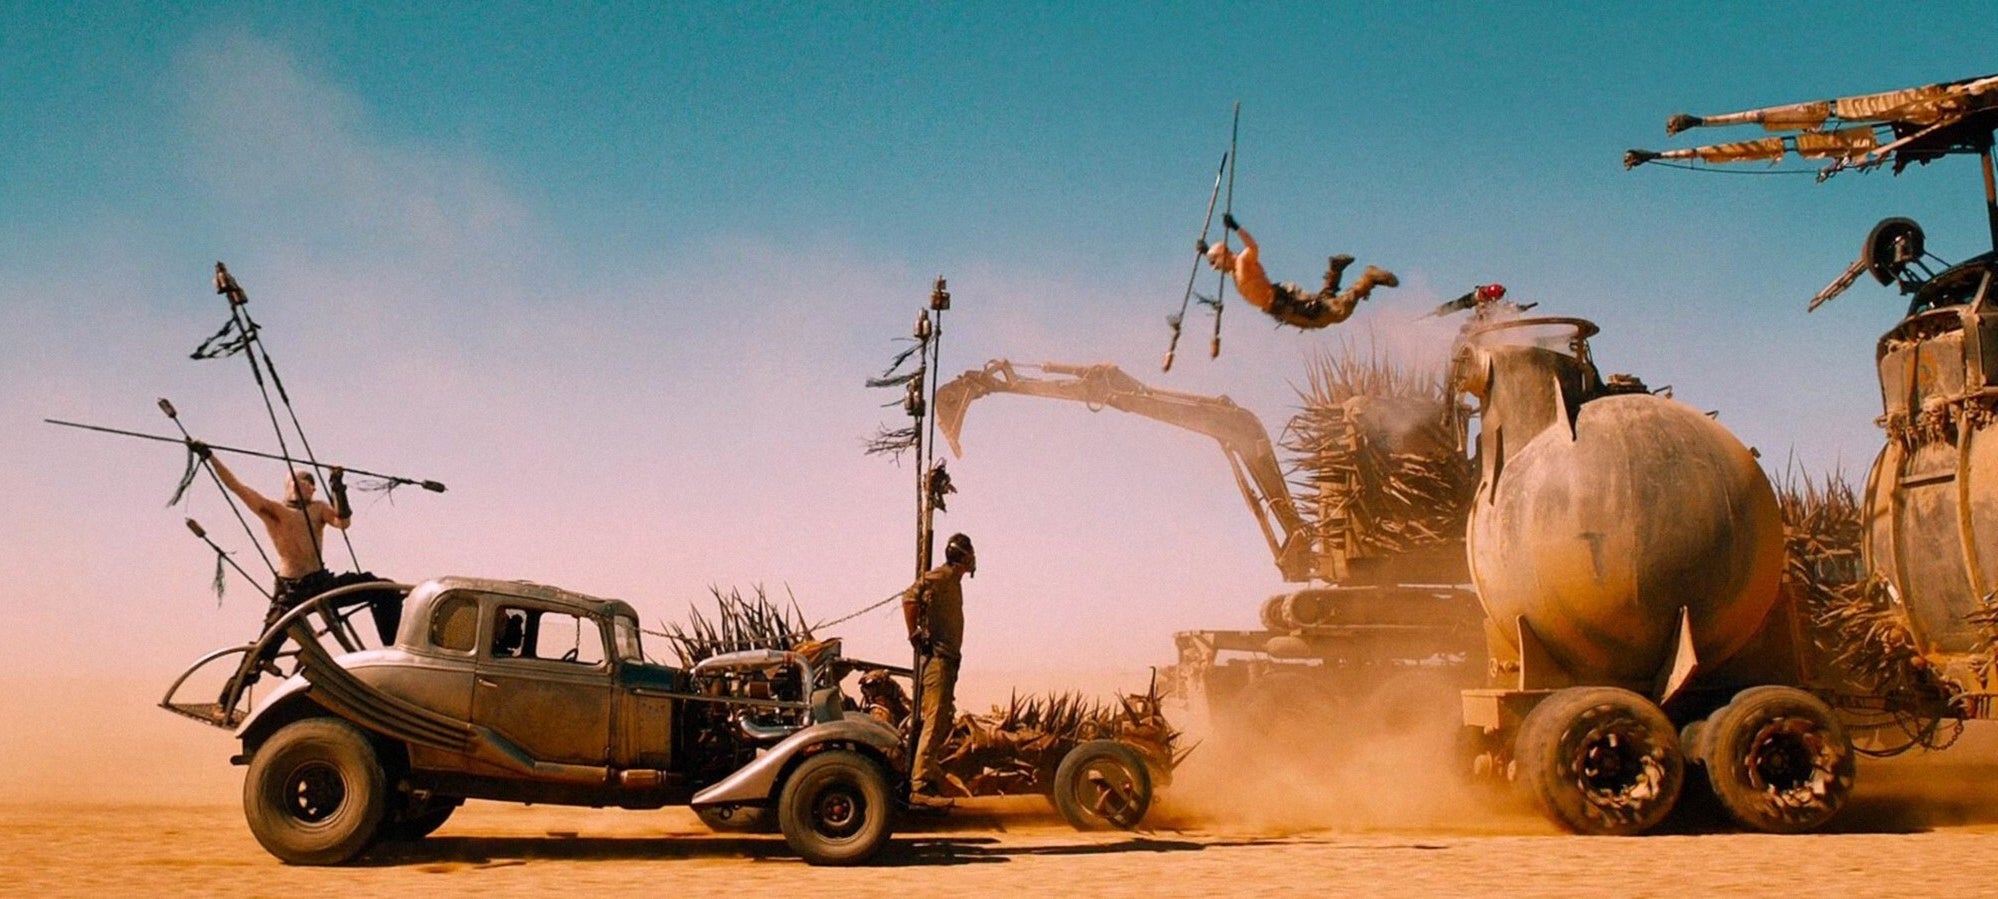 Heavily modified vehicles driving through a desert with people standing and jumping from them holding spears